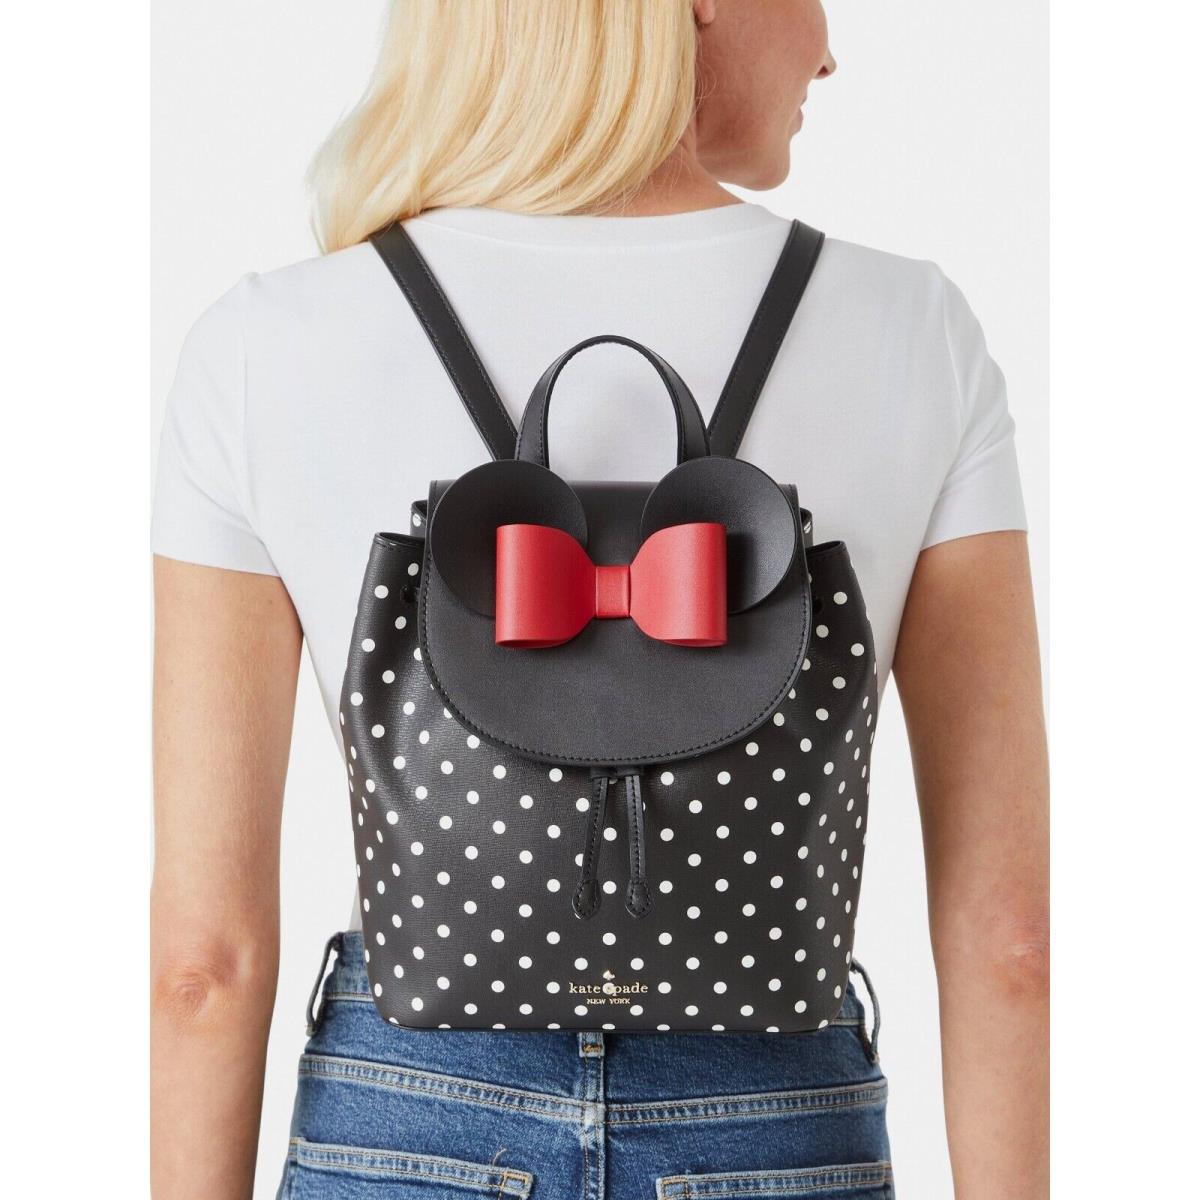 New Kate Spade Disney X Minnie Mouse Backpack Grain Leather Black Multi